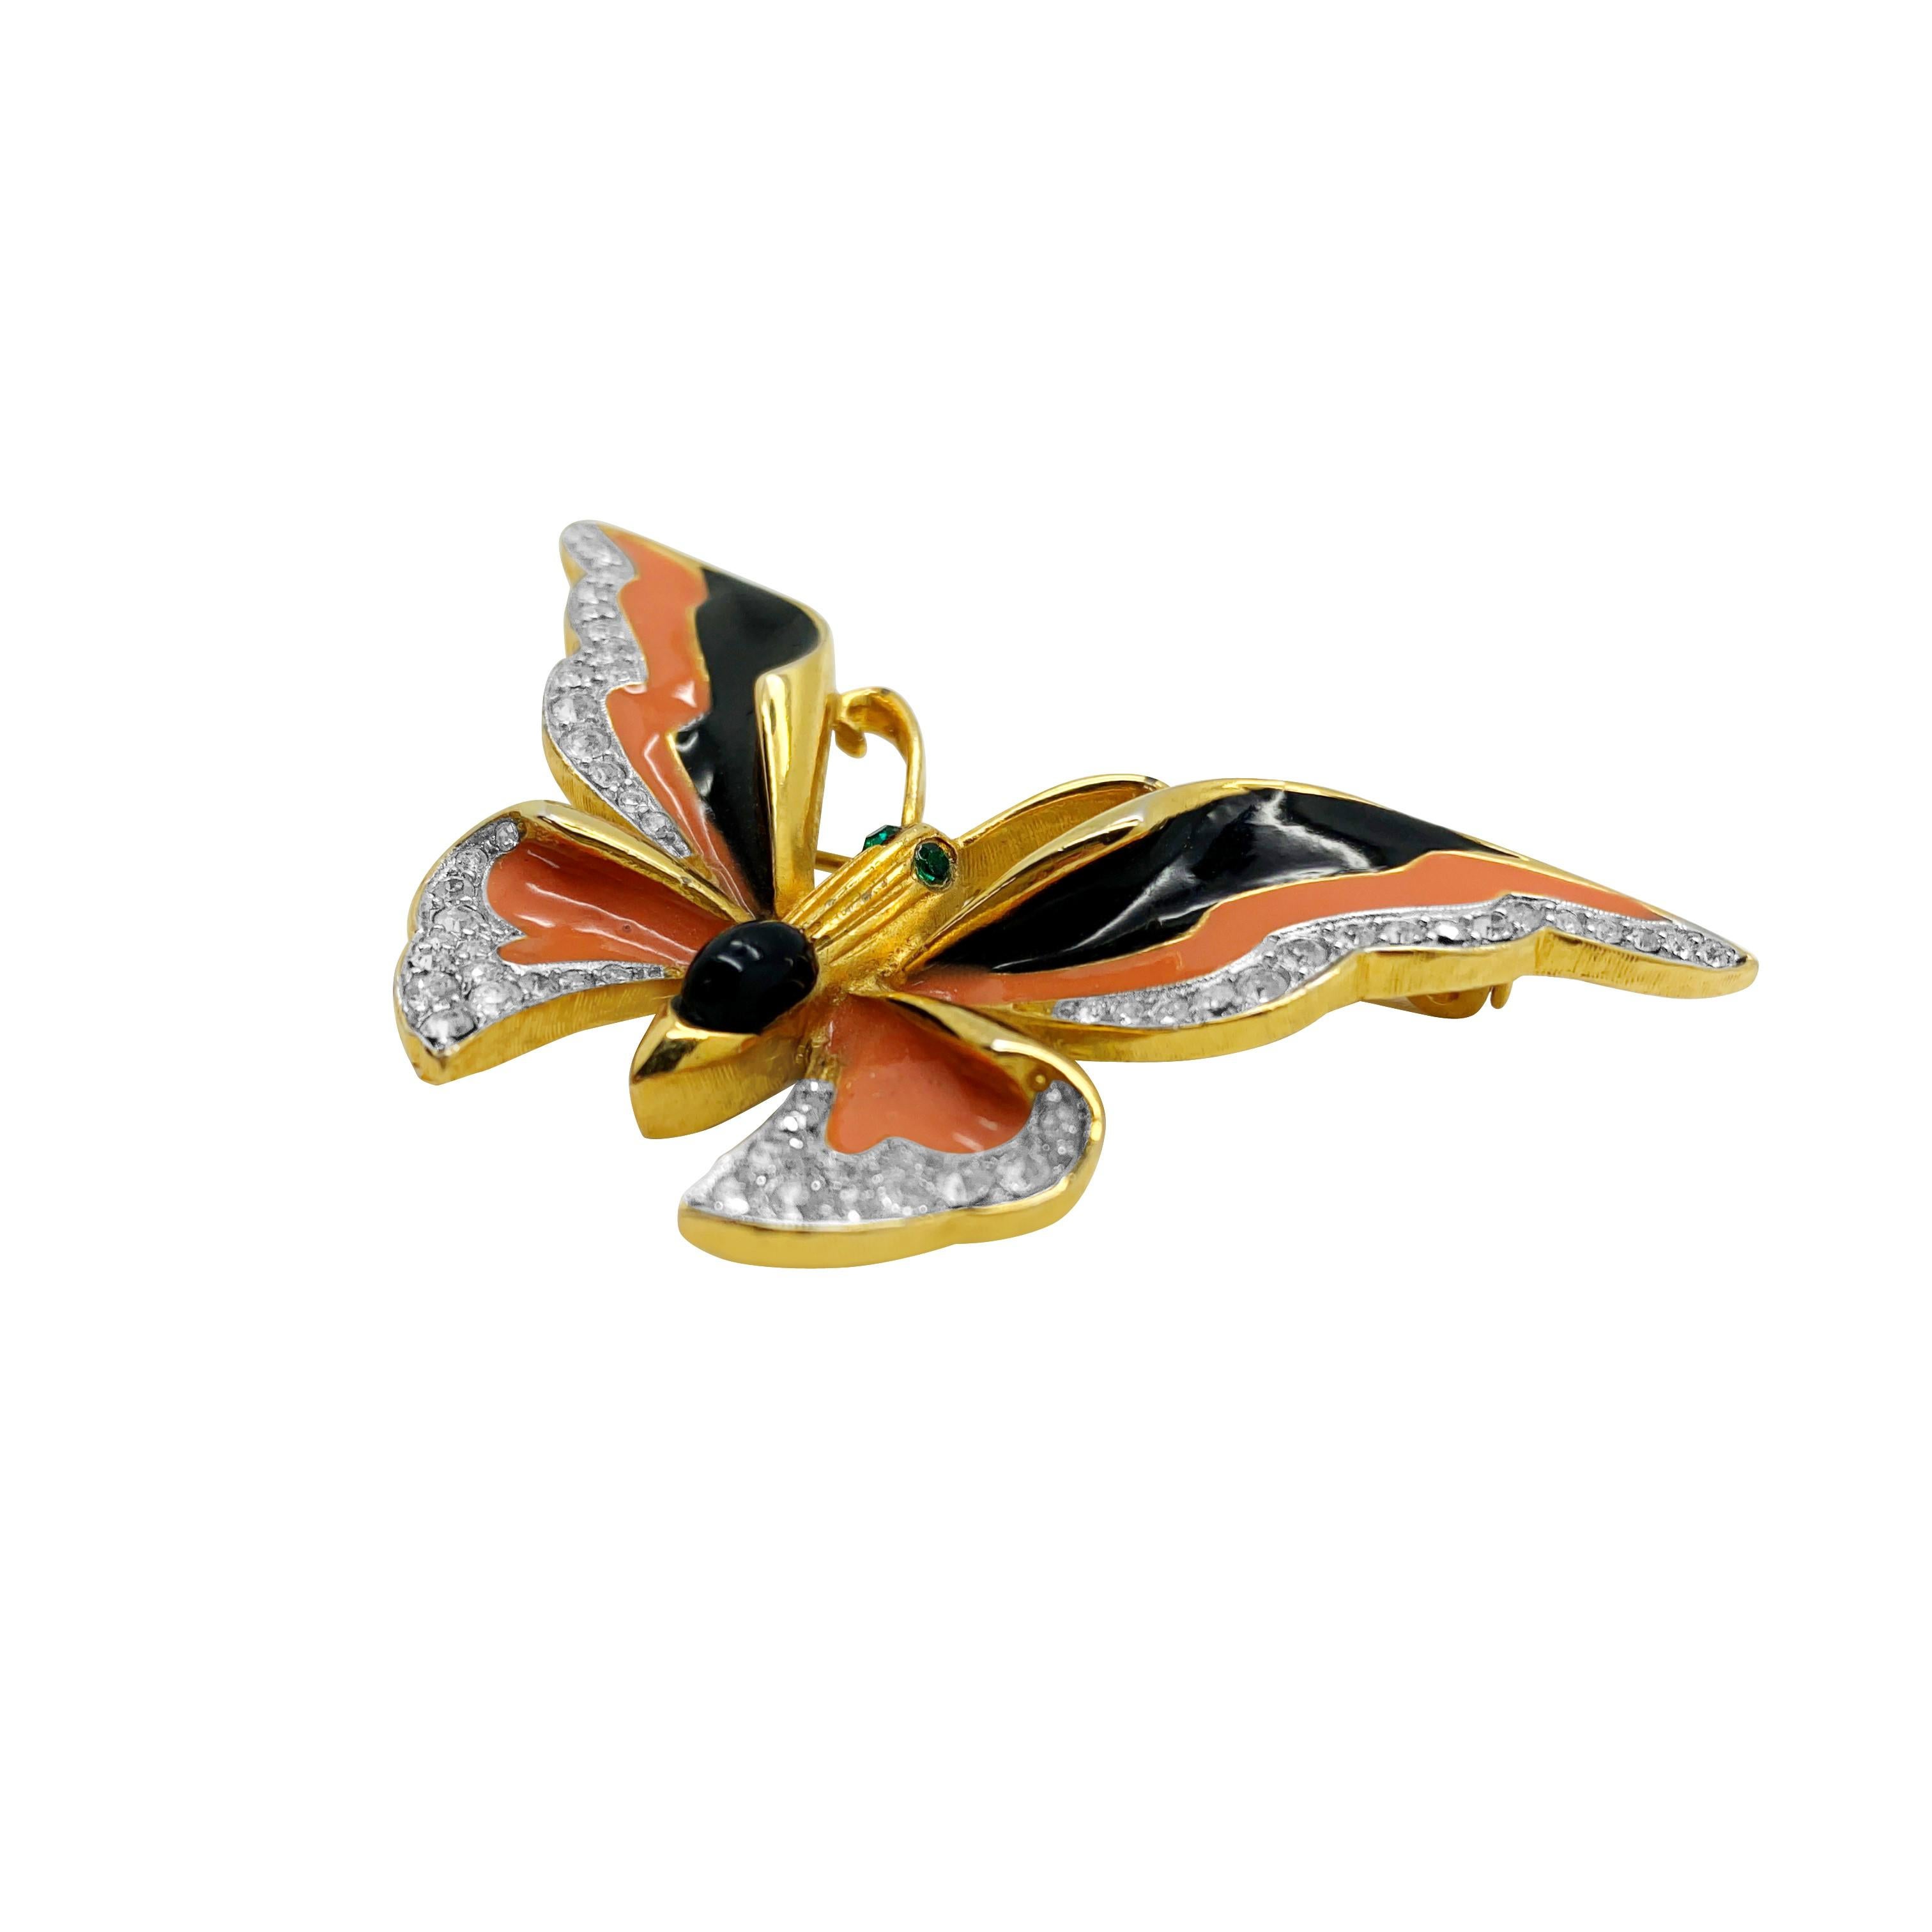 A Vintage Enamel Butterfly brooch. Featuring an adorable colour way of coral and black upon gold. 
Vintage Condition: Very good without damage or noteworthy wear. 
Materials: gold plated metal, crystal, enamel
Signed: unsigned
Fastening: rollover